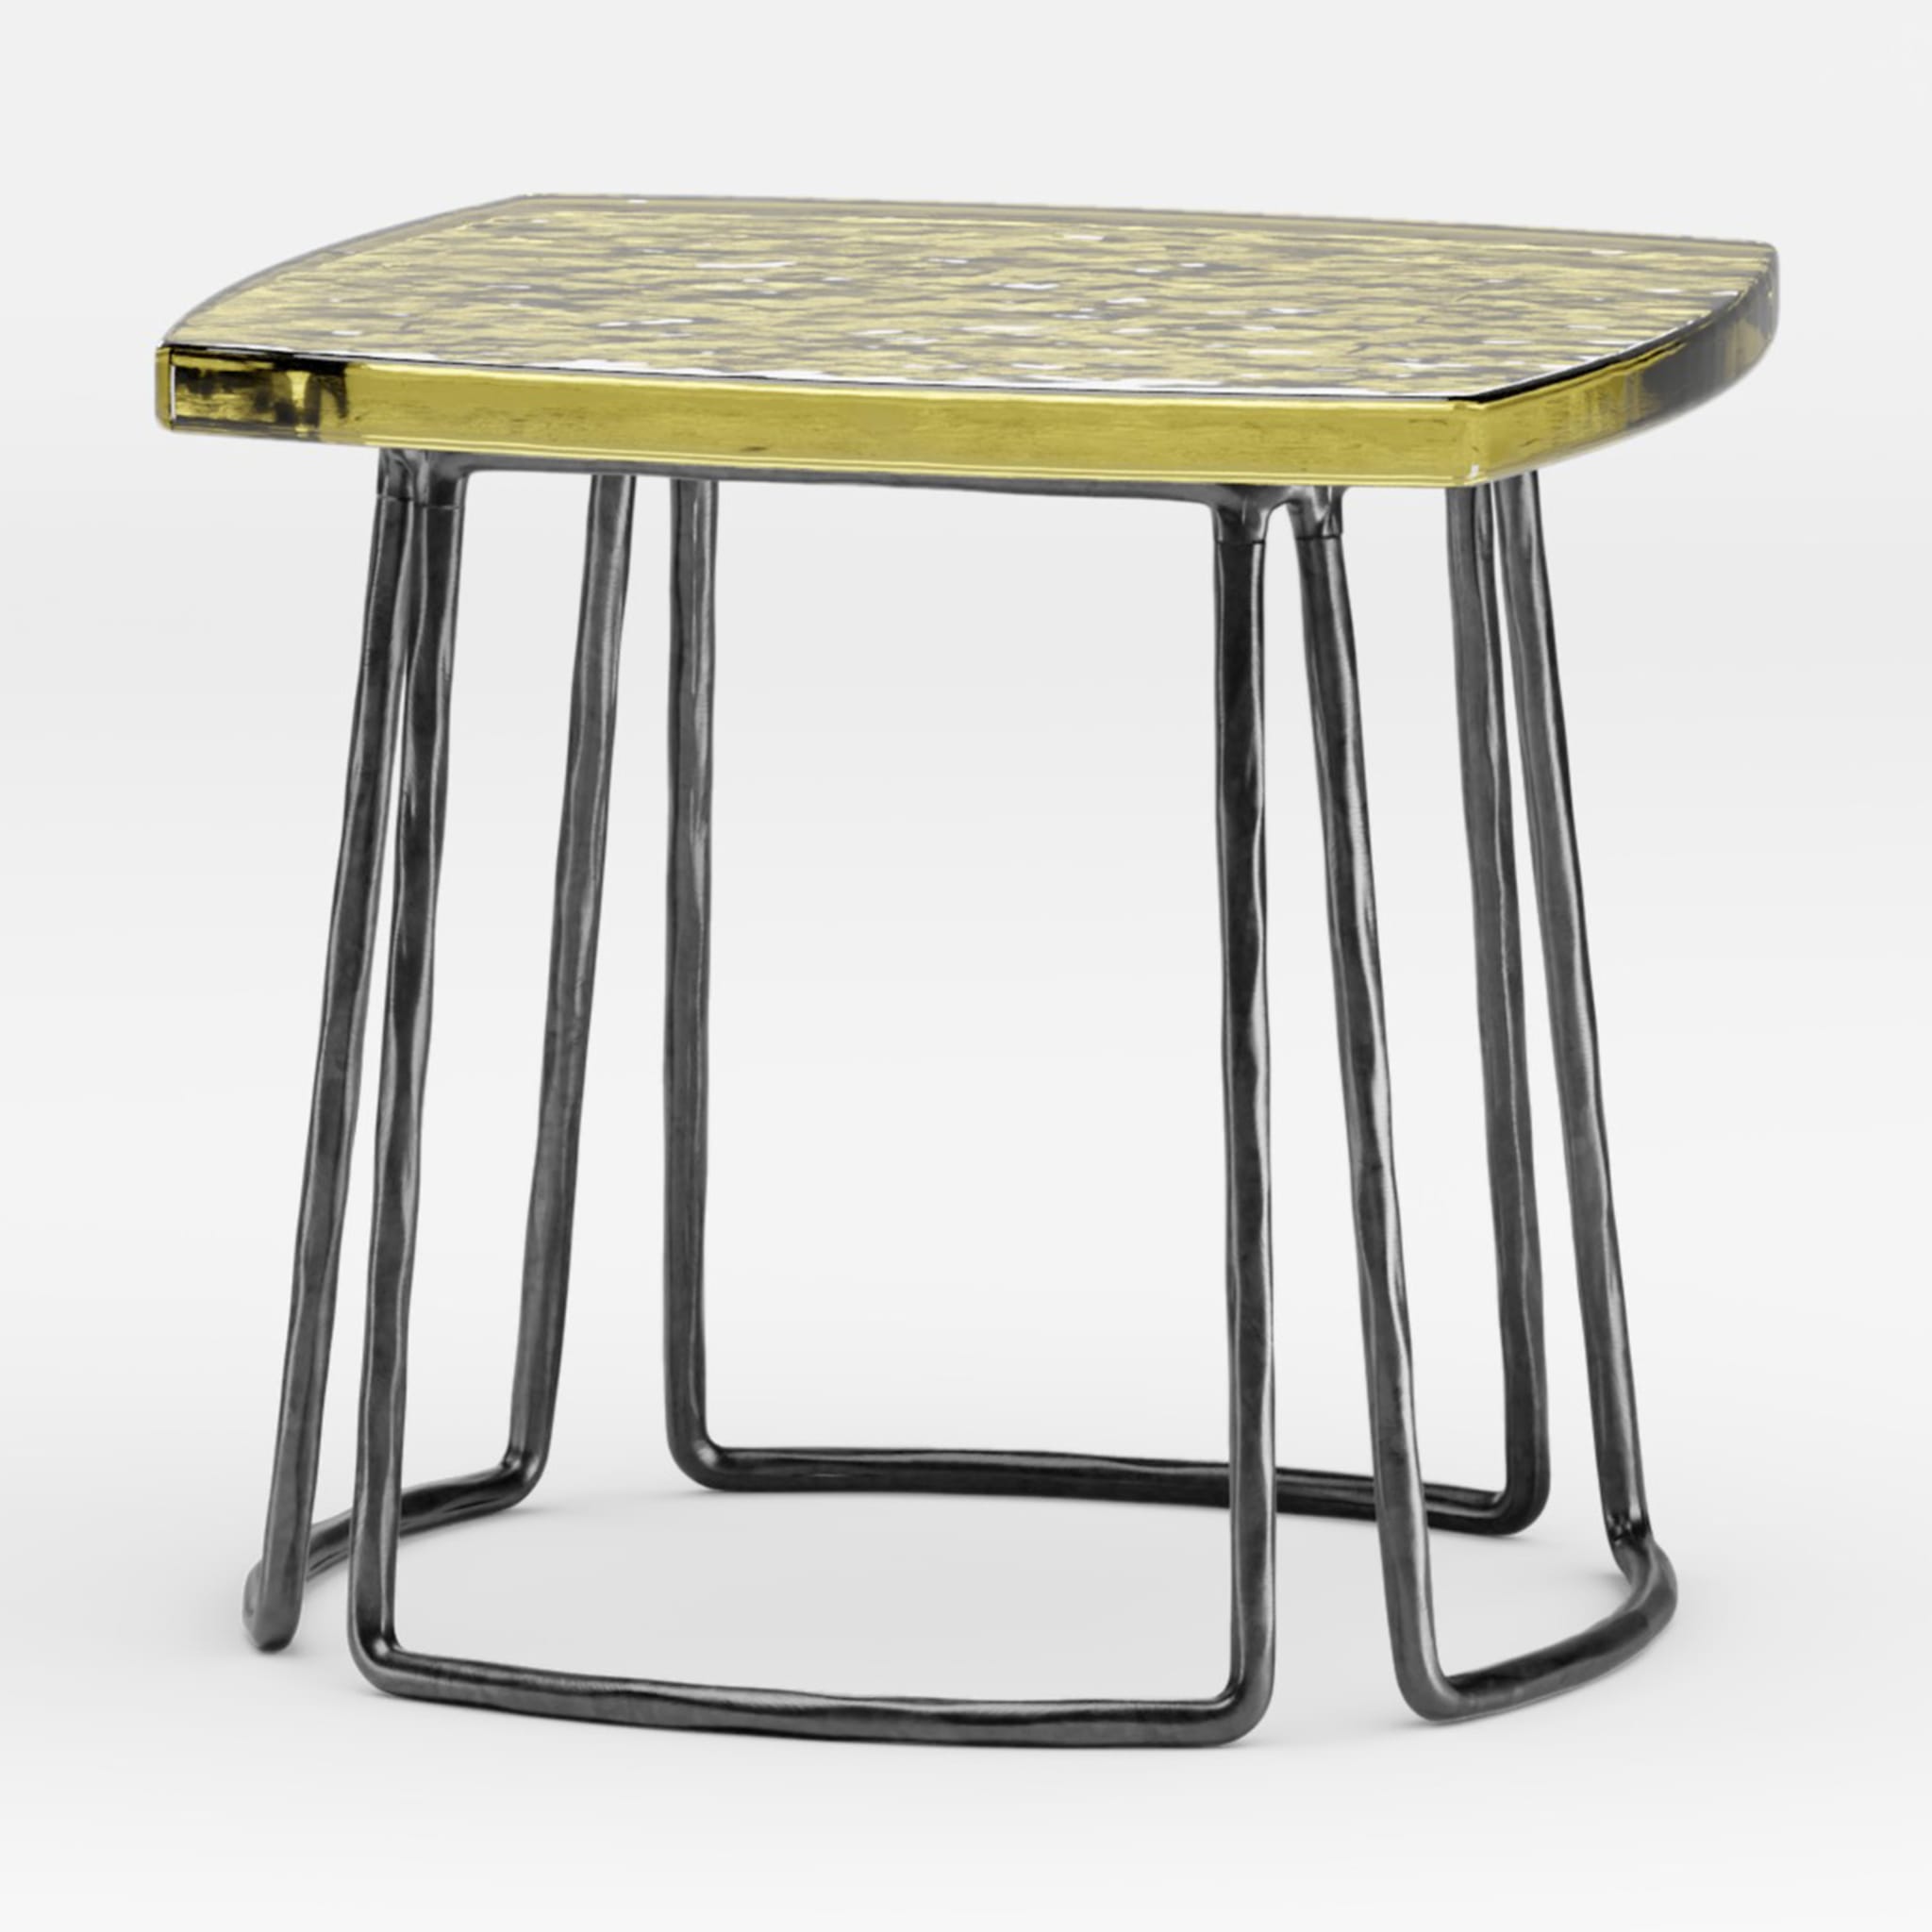 Type Tall Green Side Table by Stormo Studio - Alternative view 1